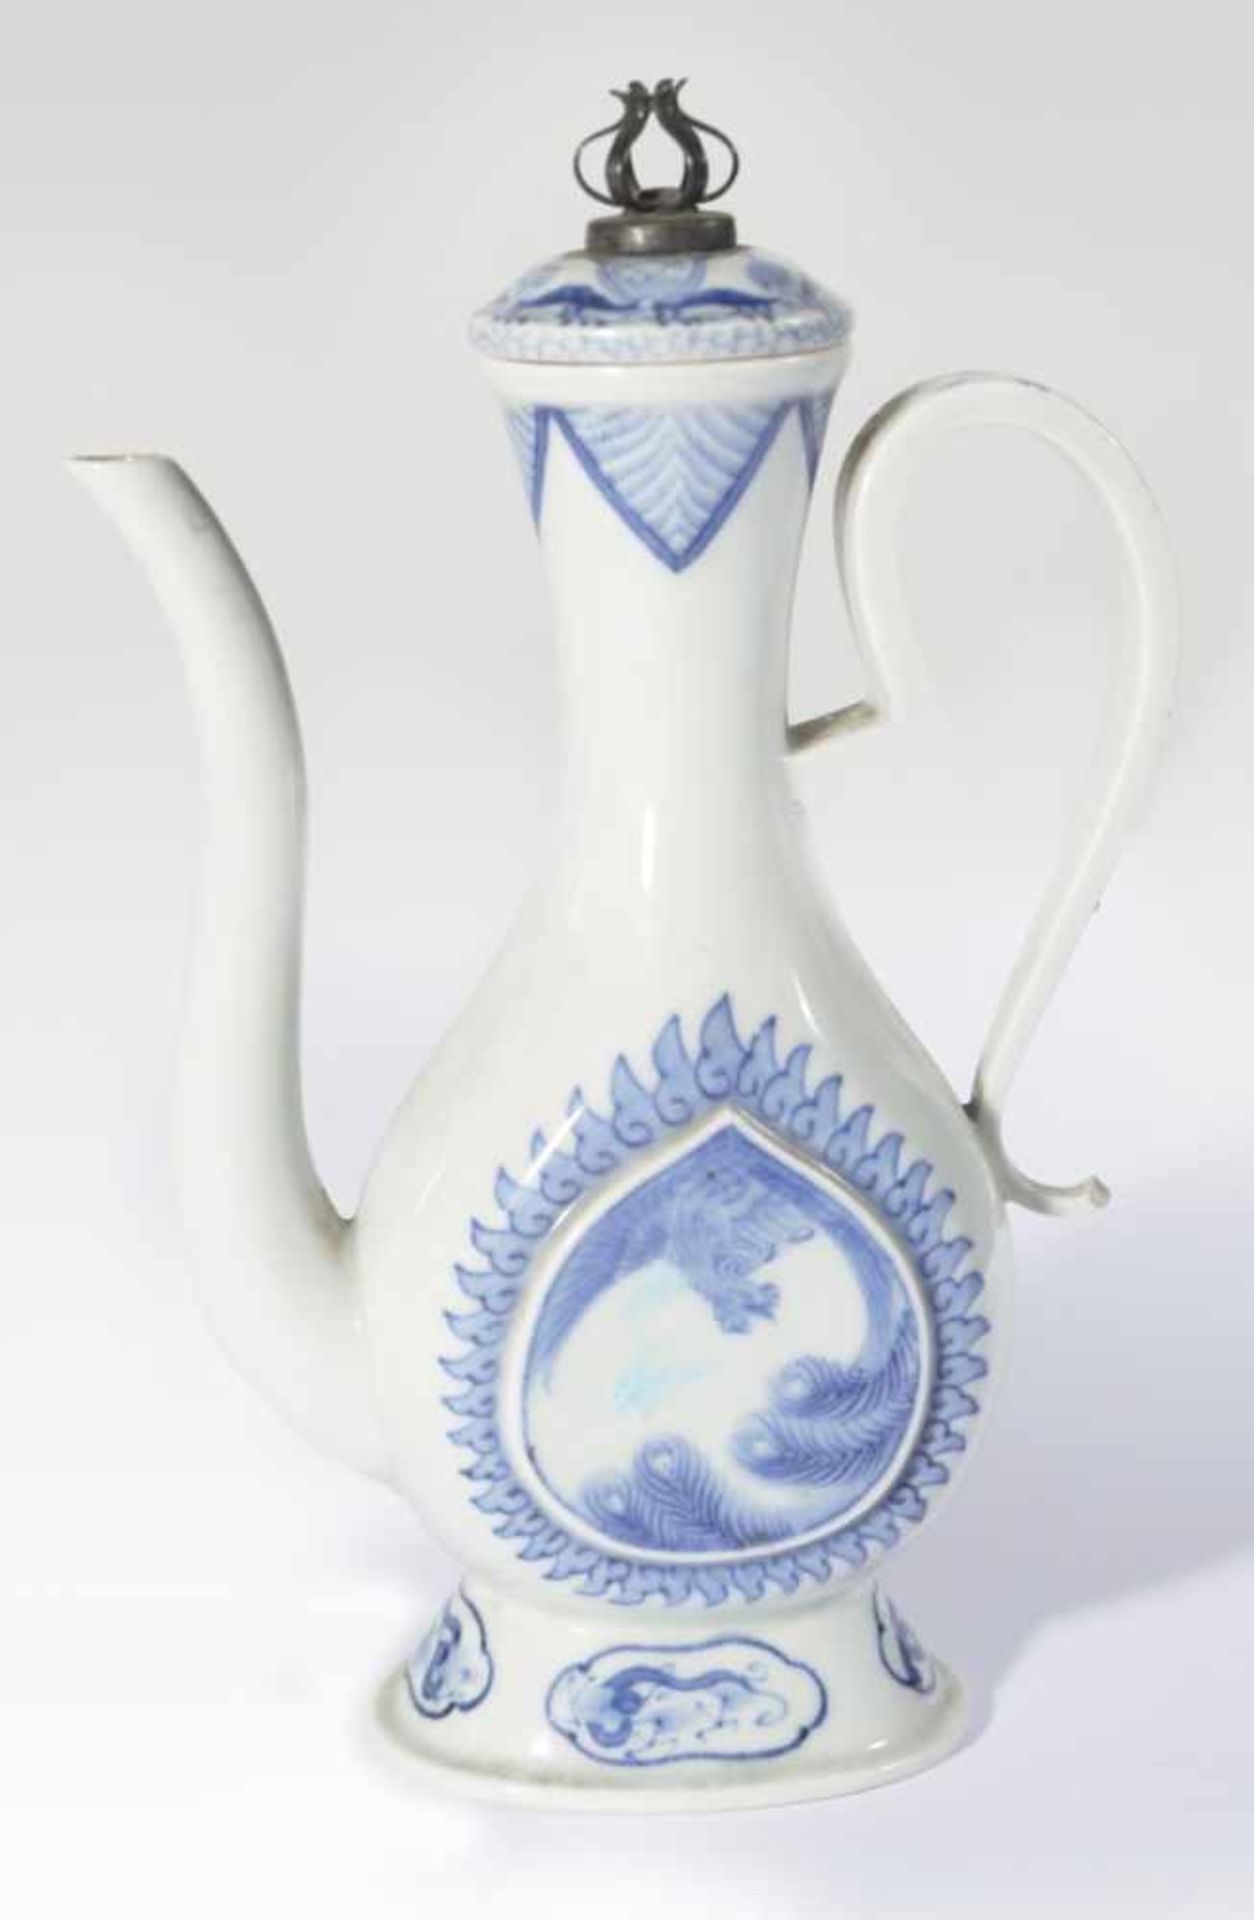 Small pot with blue decoration, China, Porcelain, 20th c., 20,5 cm high